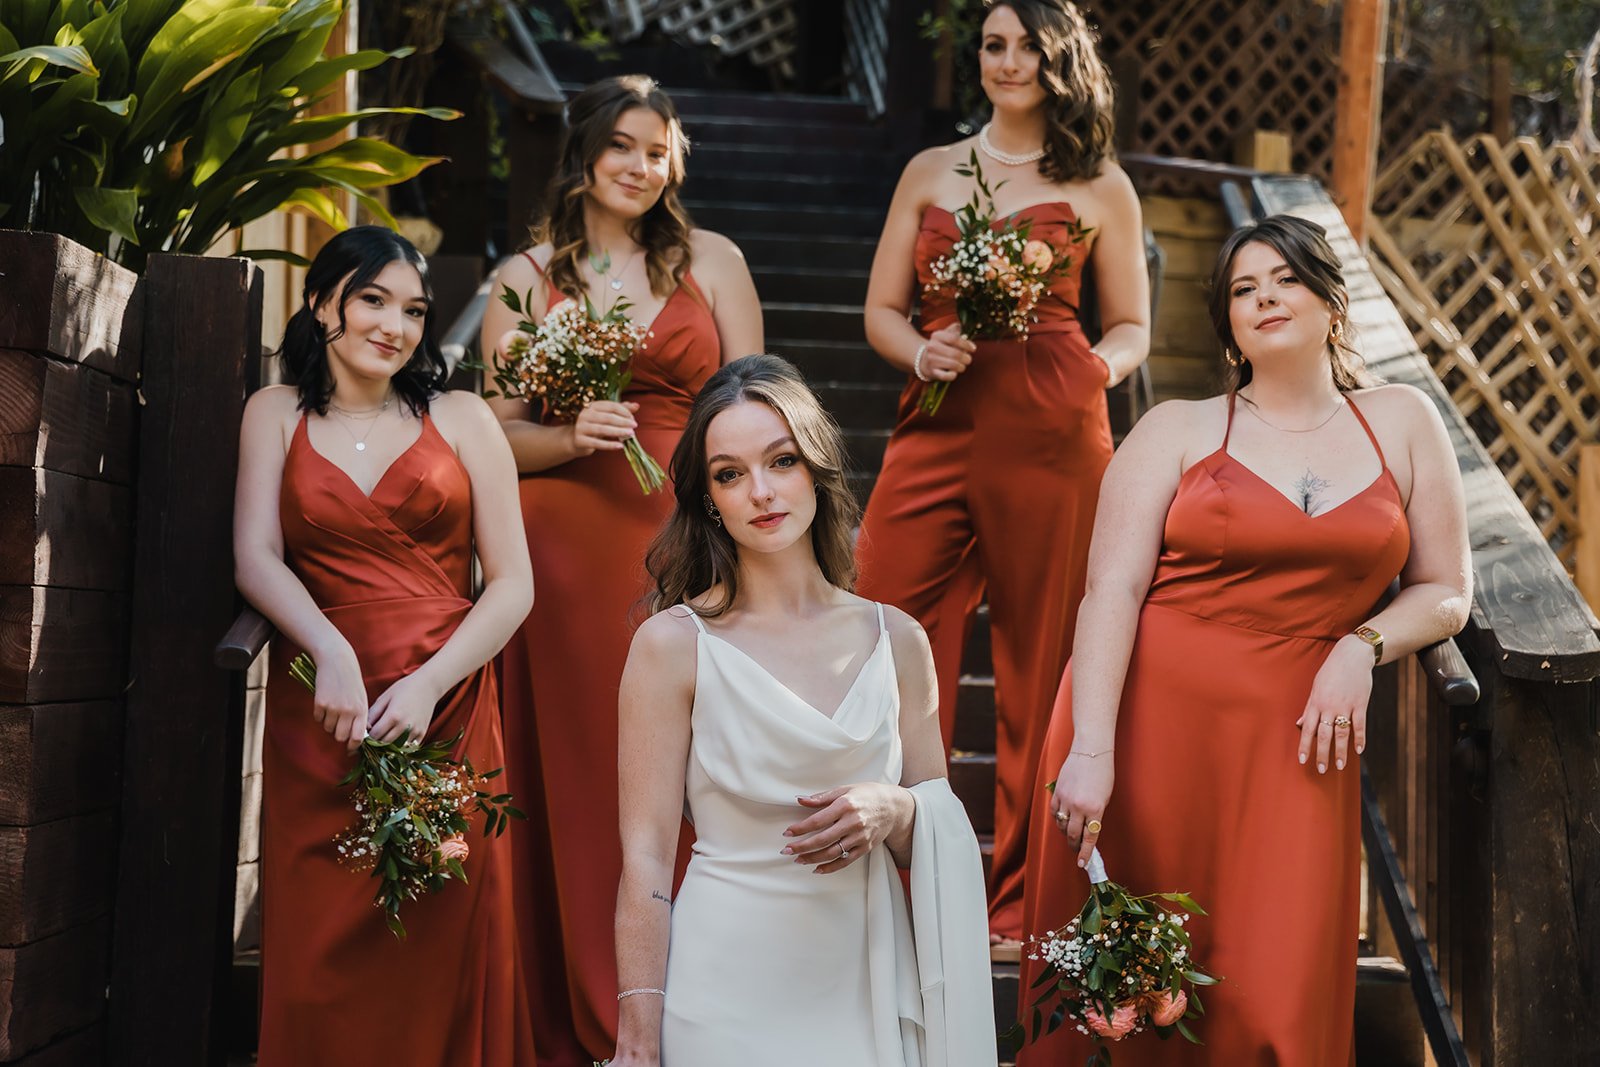 the 1909 in topanga canyon was a gorgeous rustic and romantic setting for this bride's destination wedding